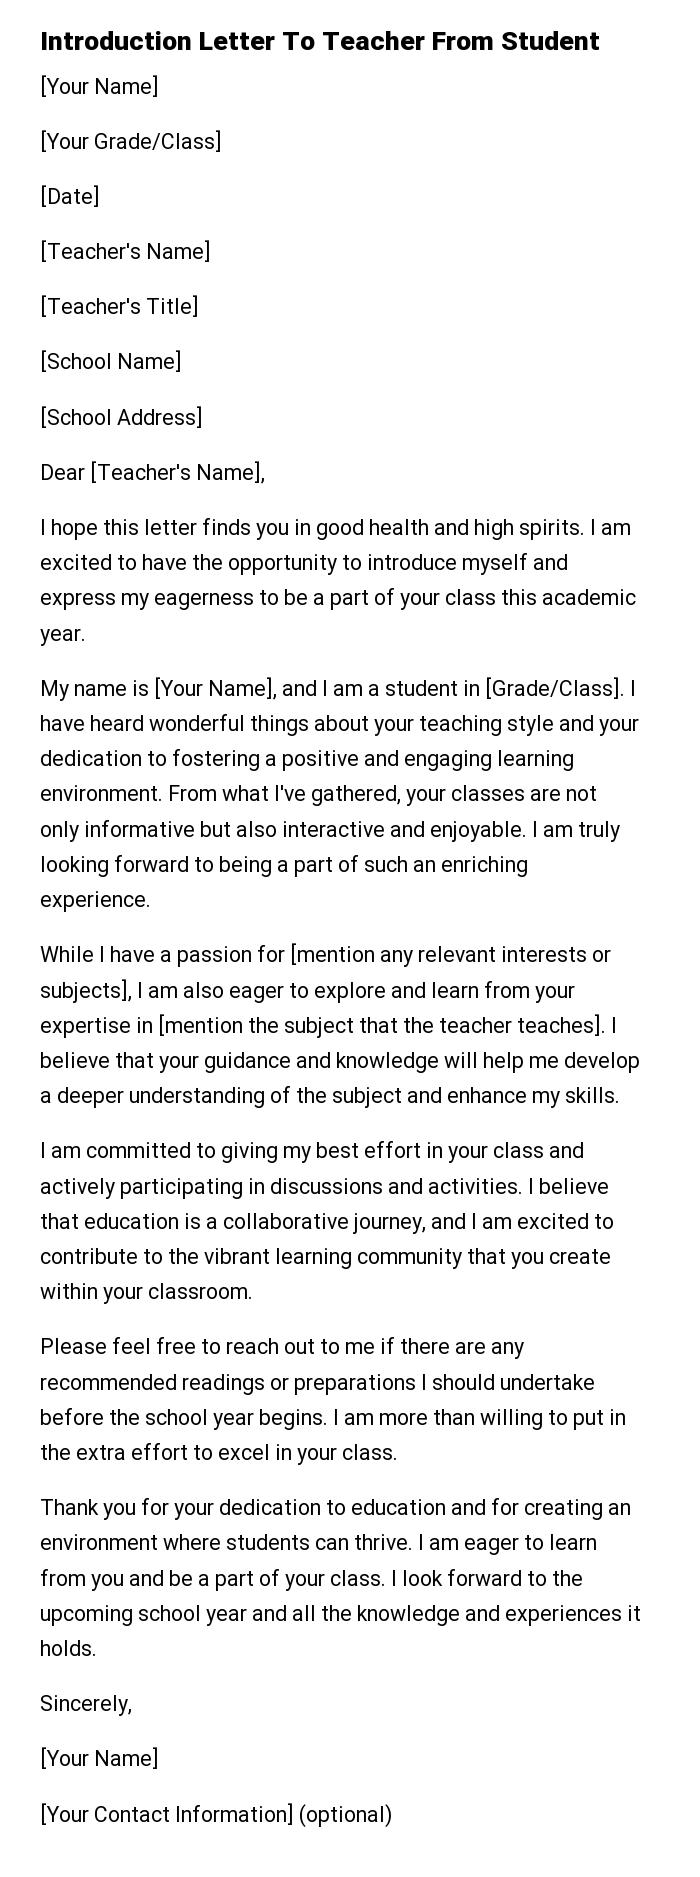 Introduction Letter To Teacher From Student